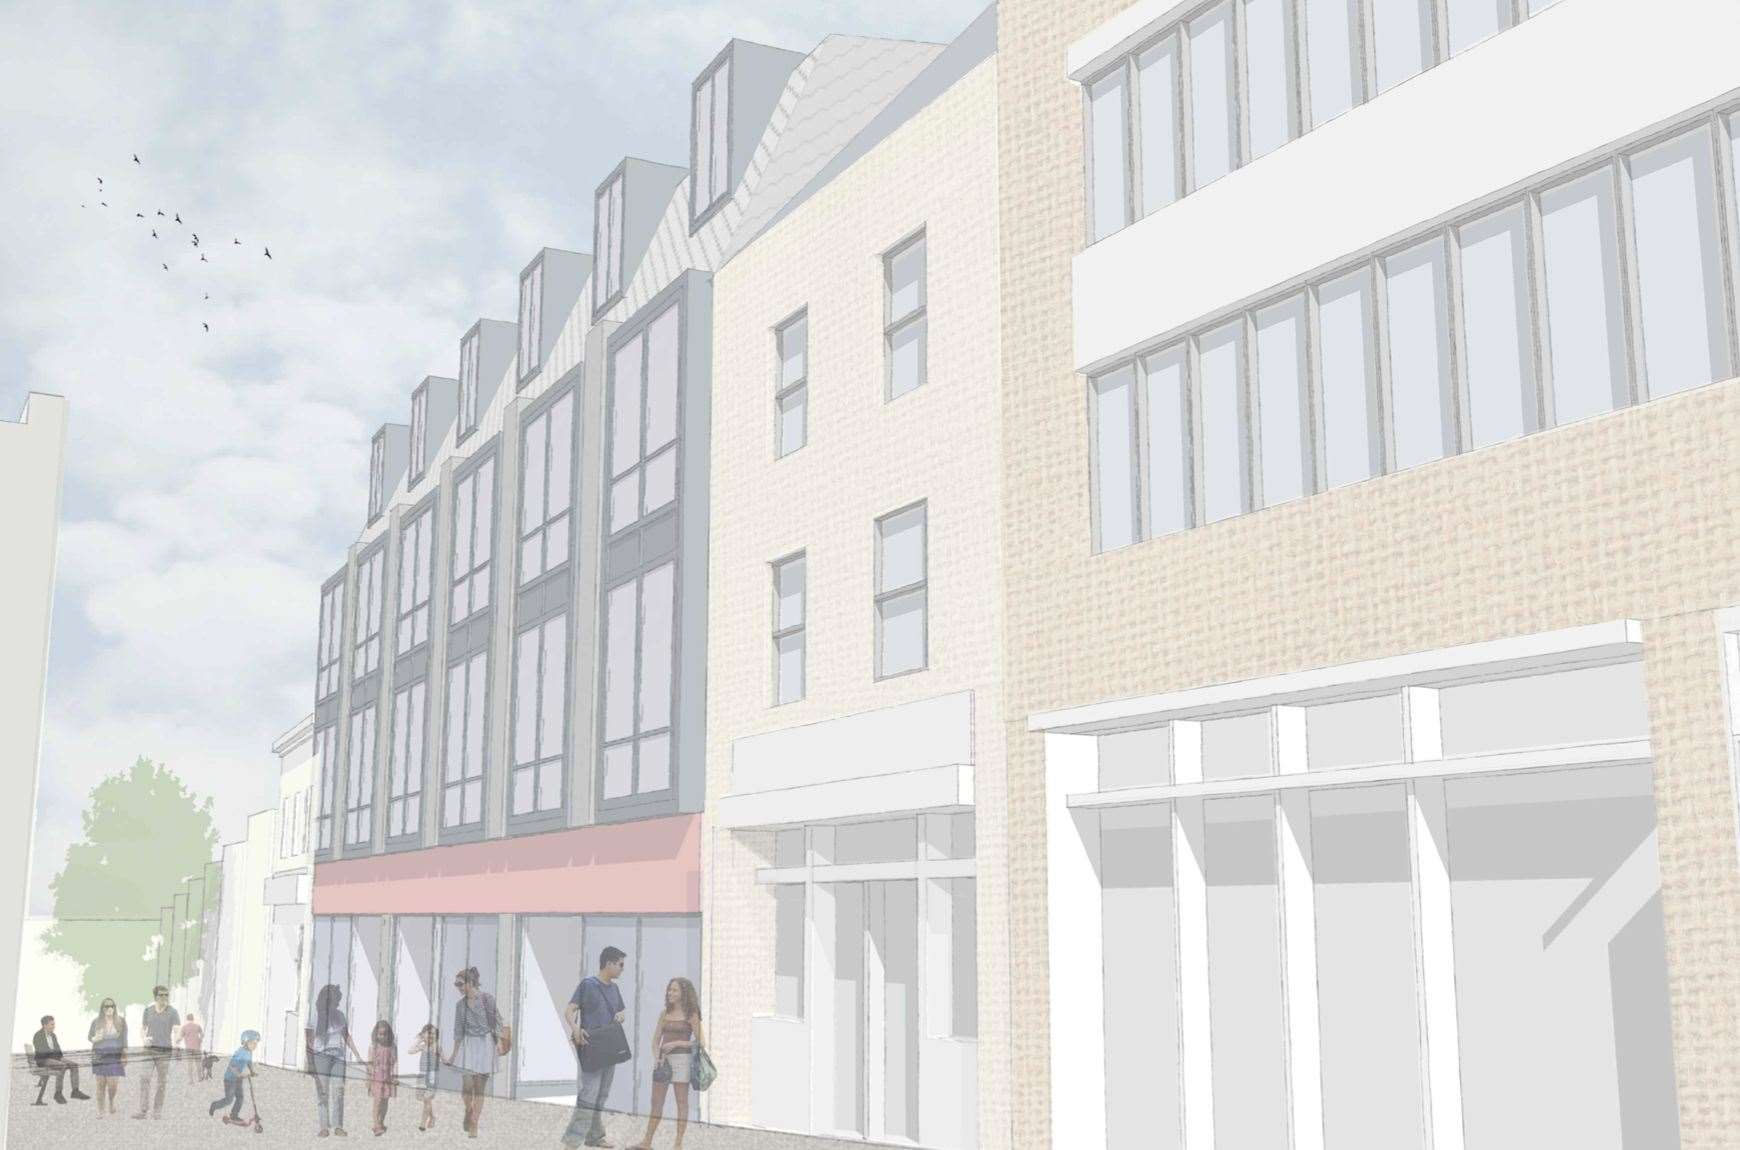 The new development would be a mix of residential and retail space in Margate High Street. Picture: Black Architecture